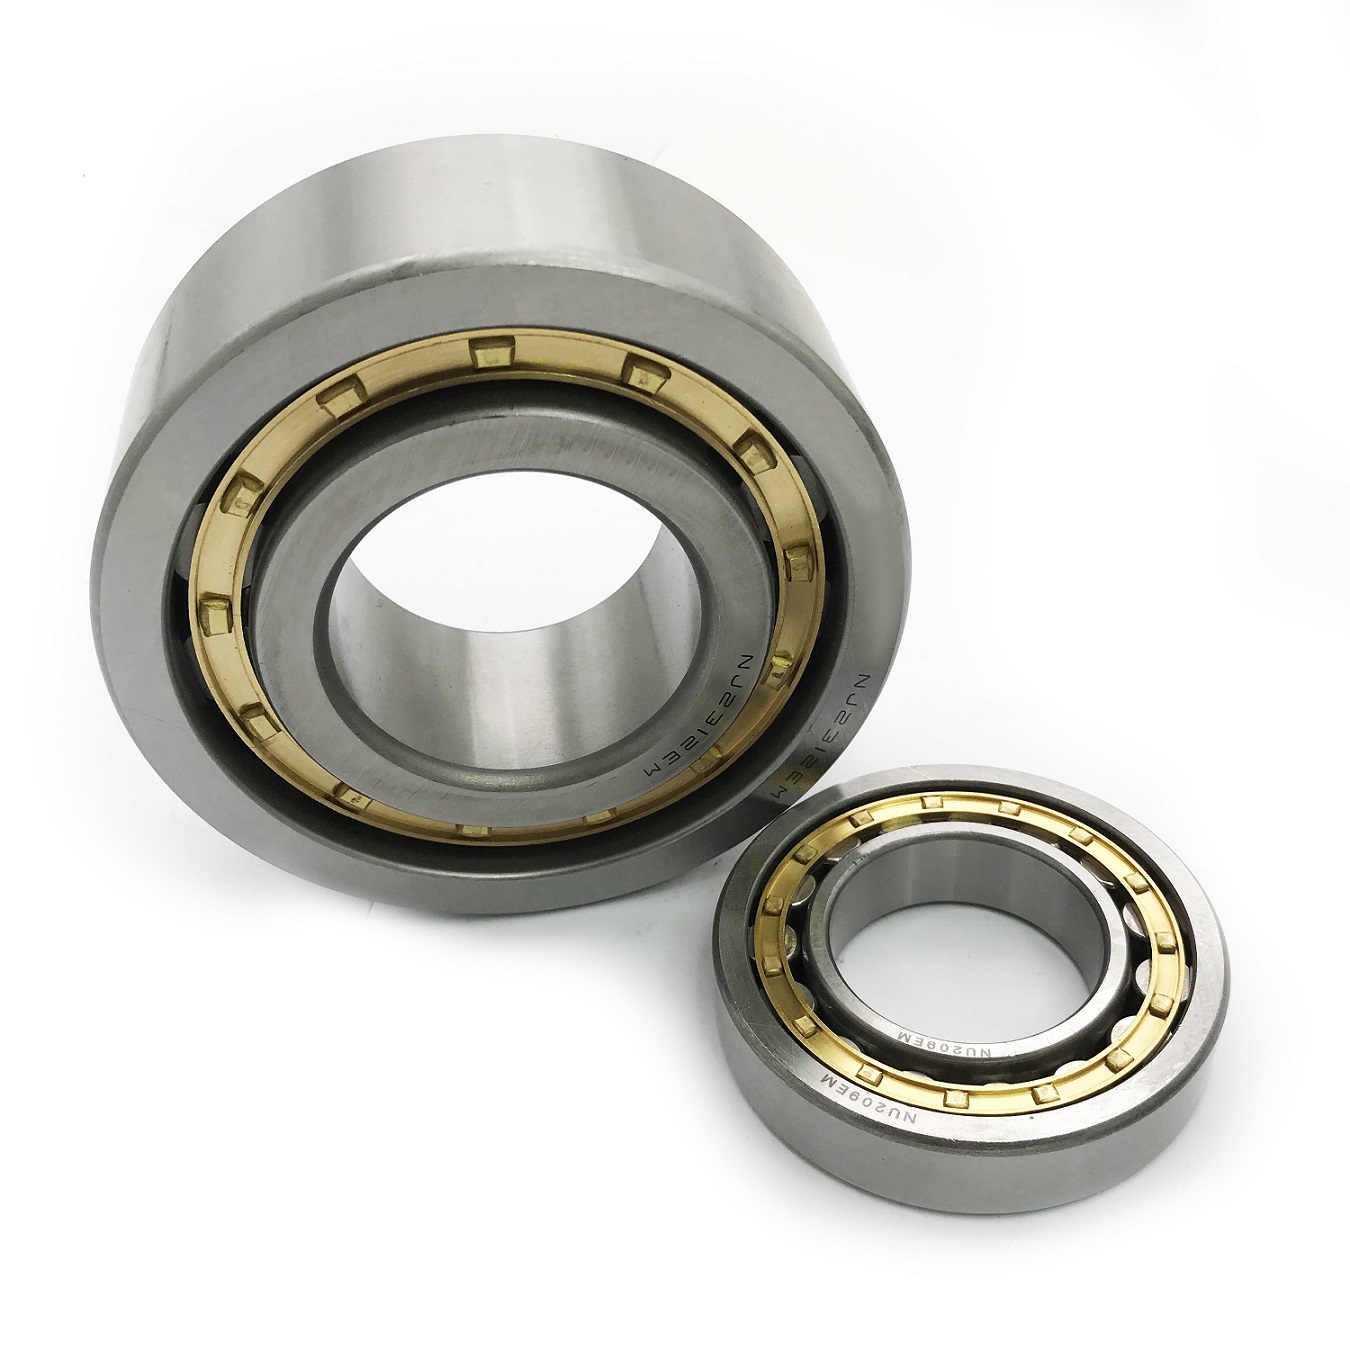 NU310 cylindrical rolling bearings